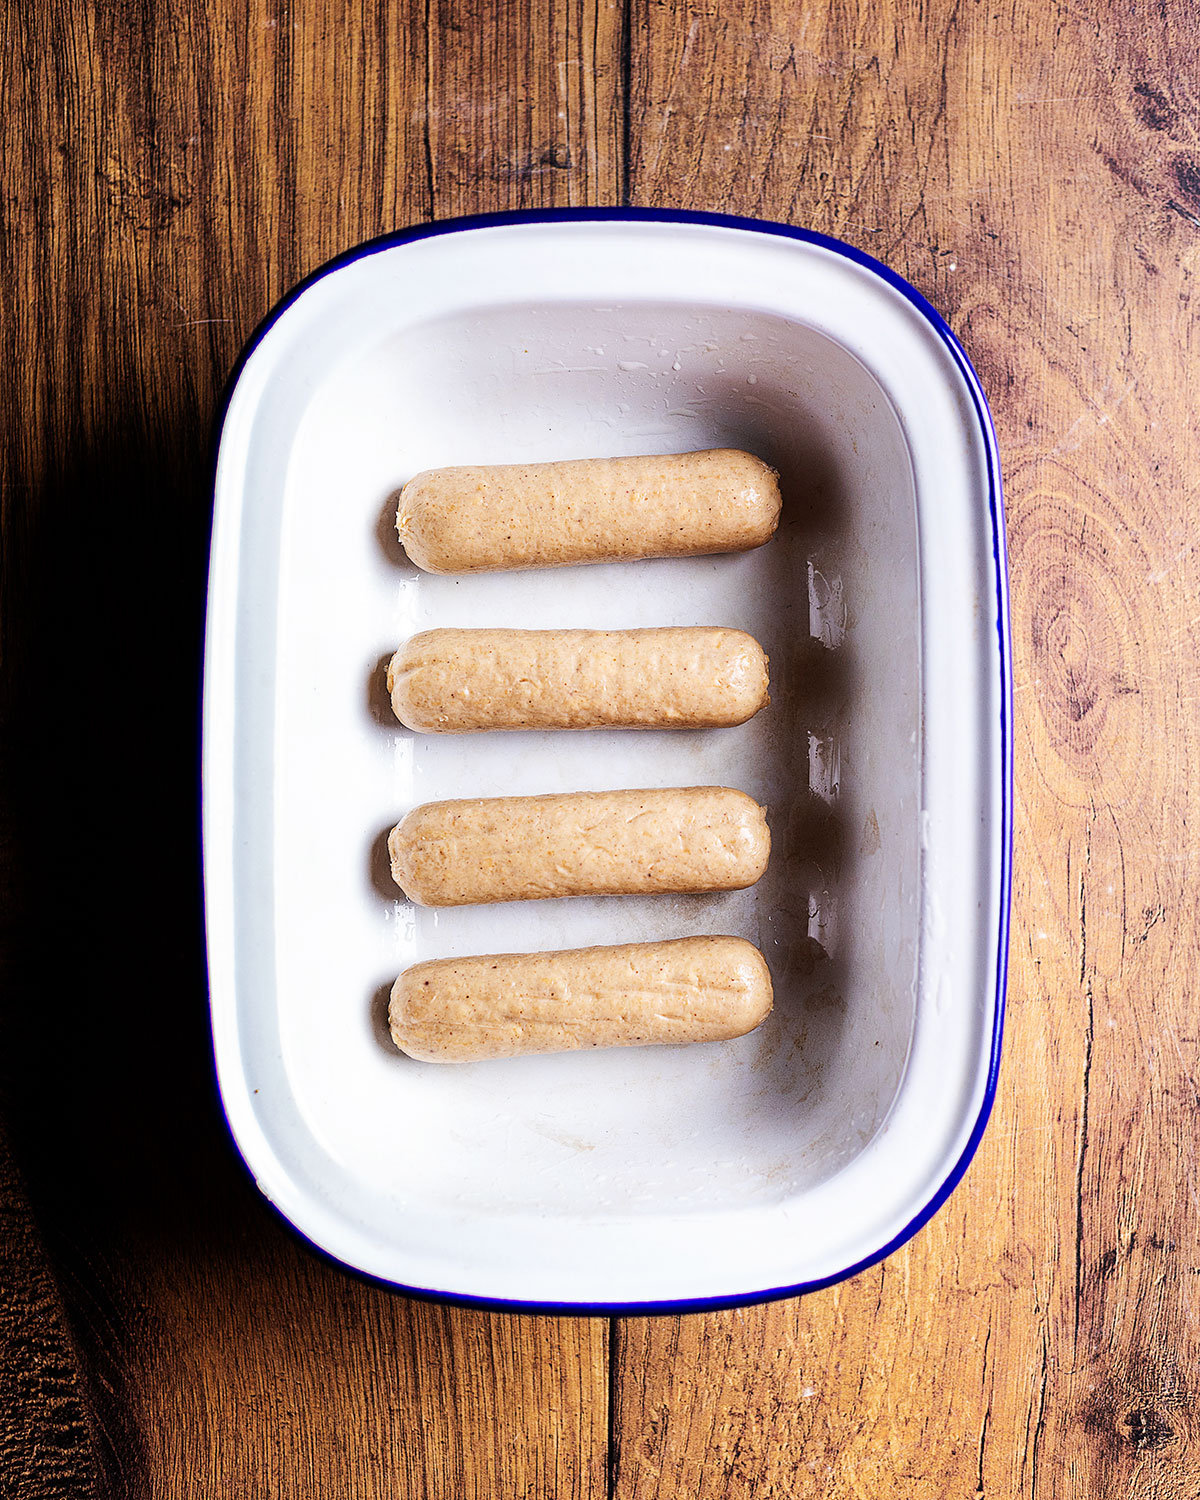 uncooked vegan sausages in an oven dish, arranged parallel